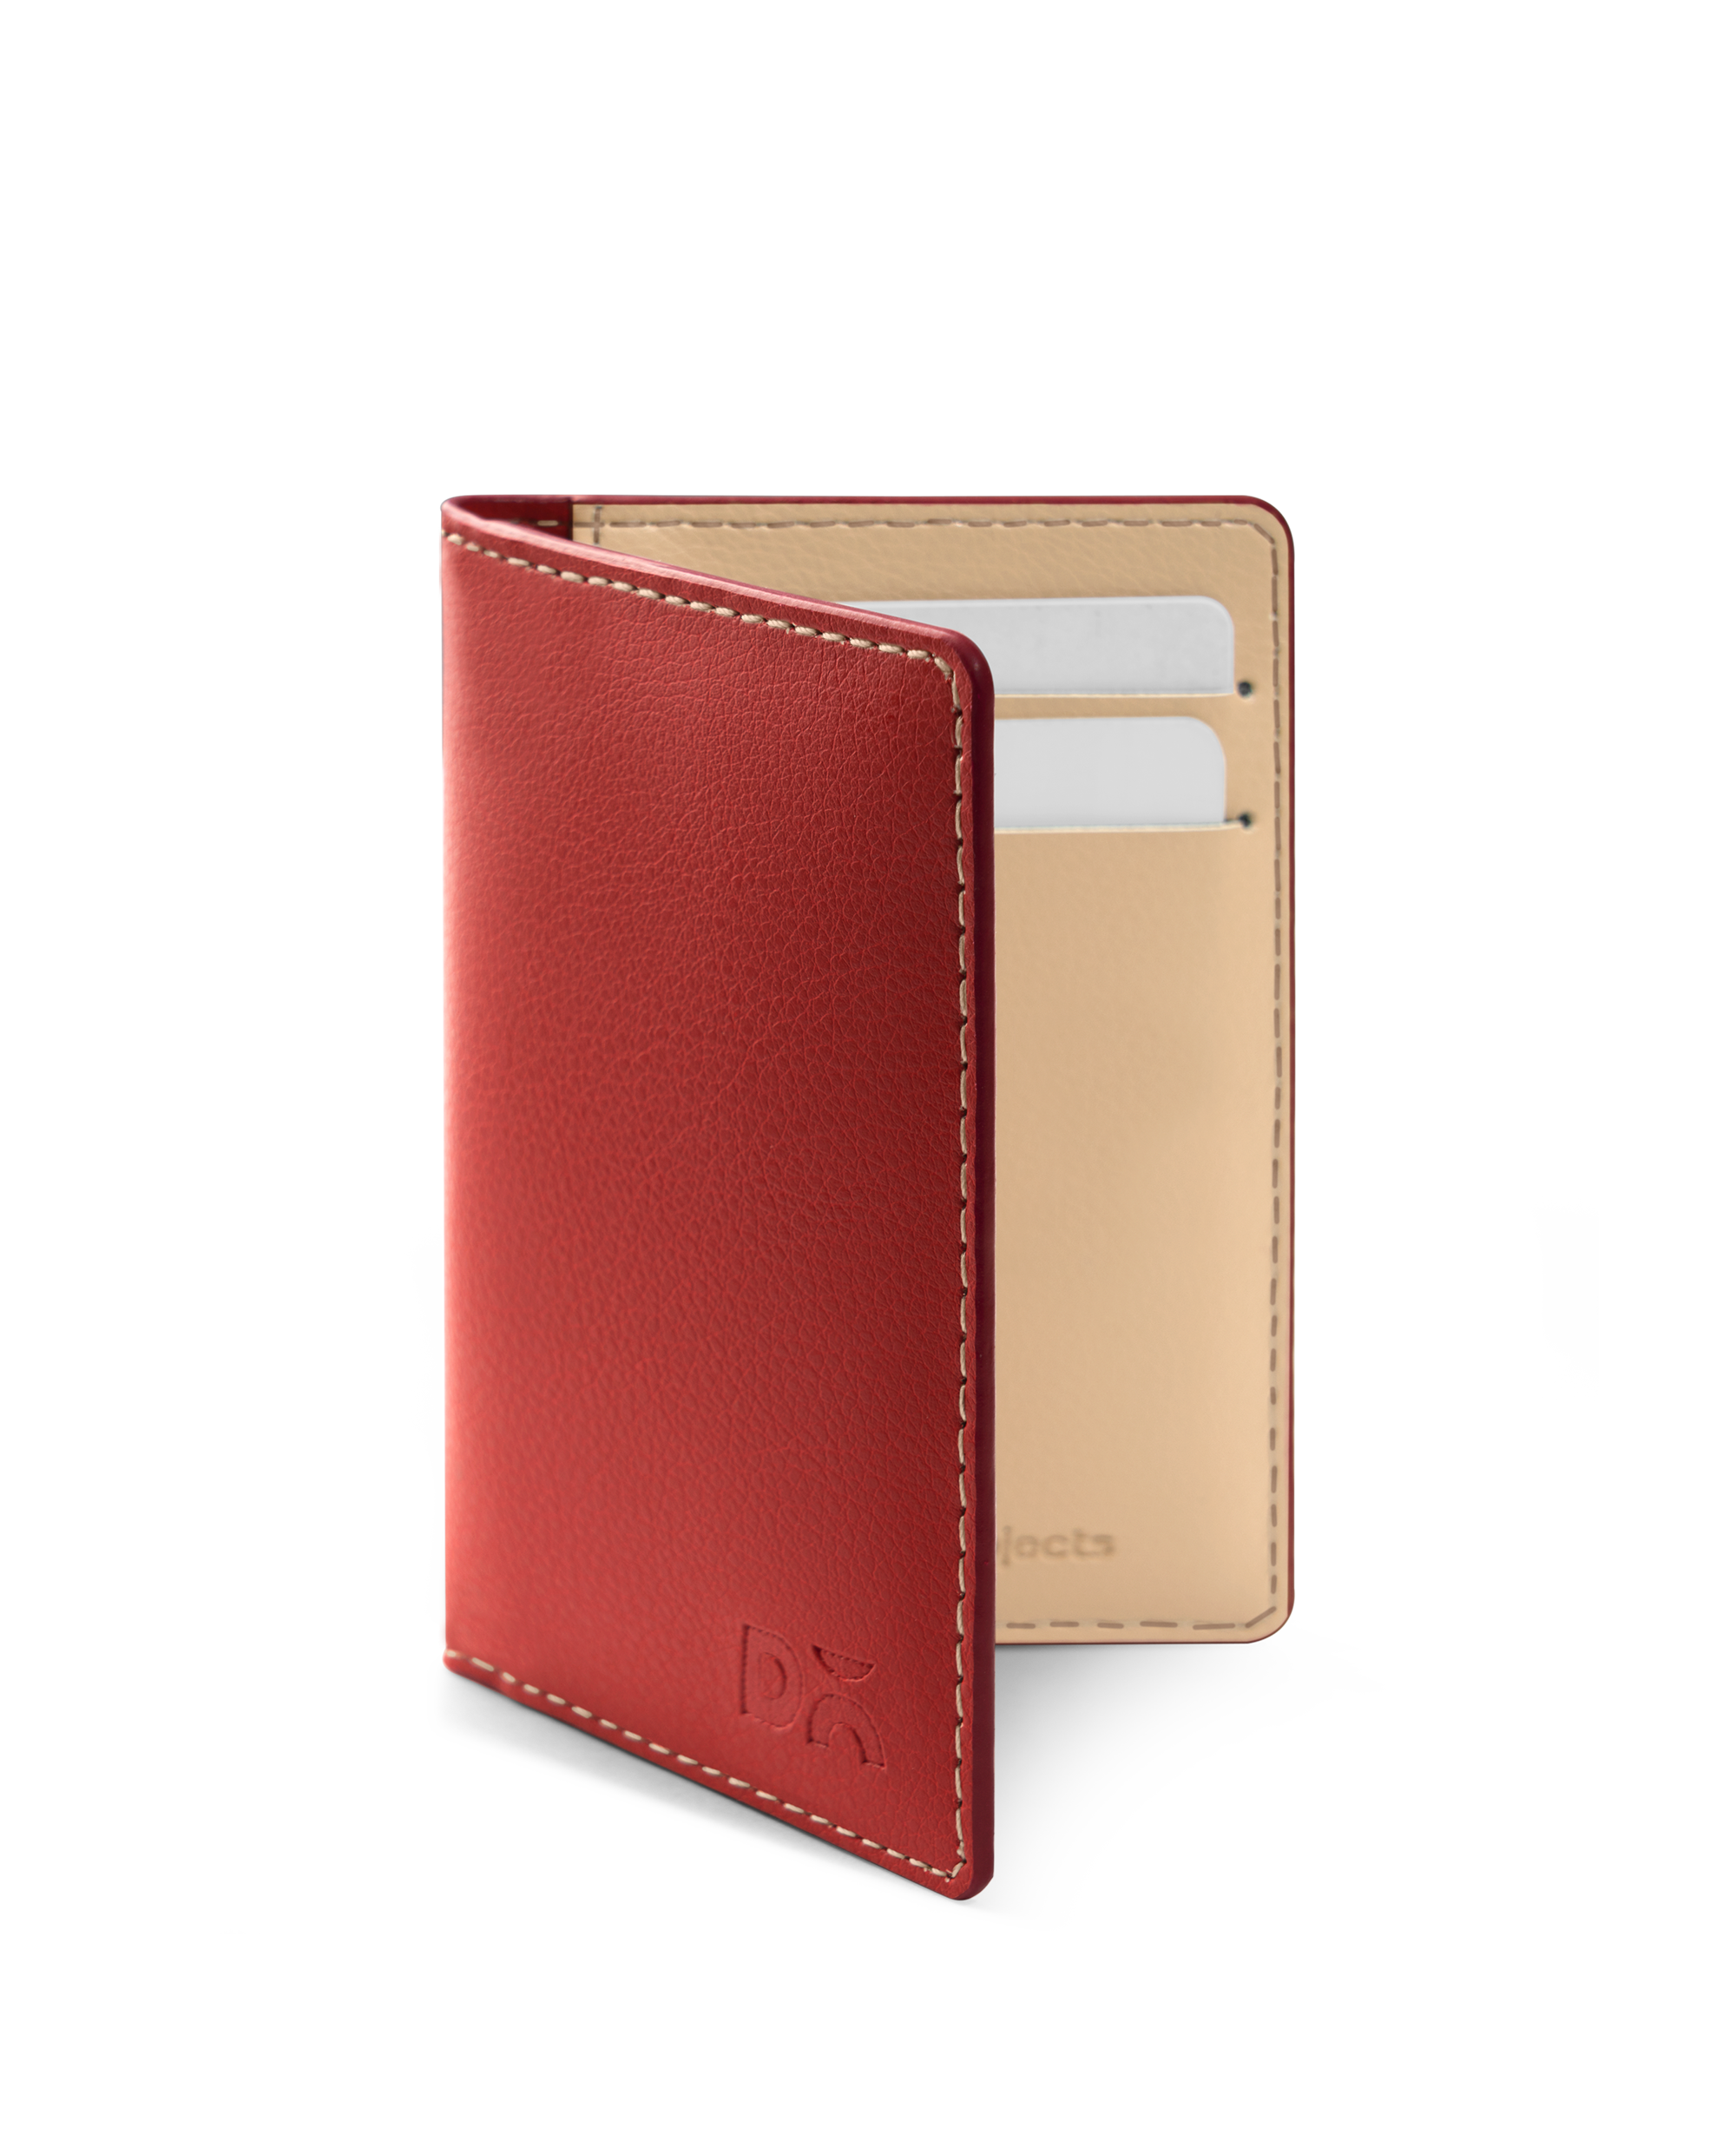 Scarlet Red Log Bi-Fold Leather Wallet by DailyObjects